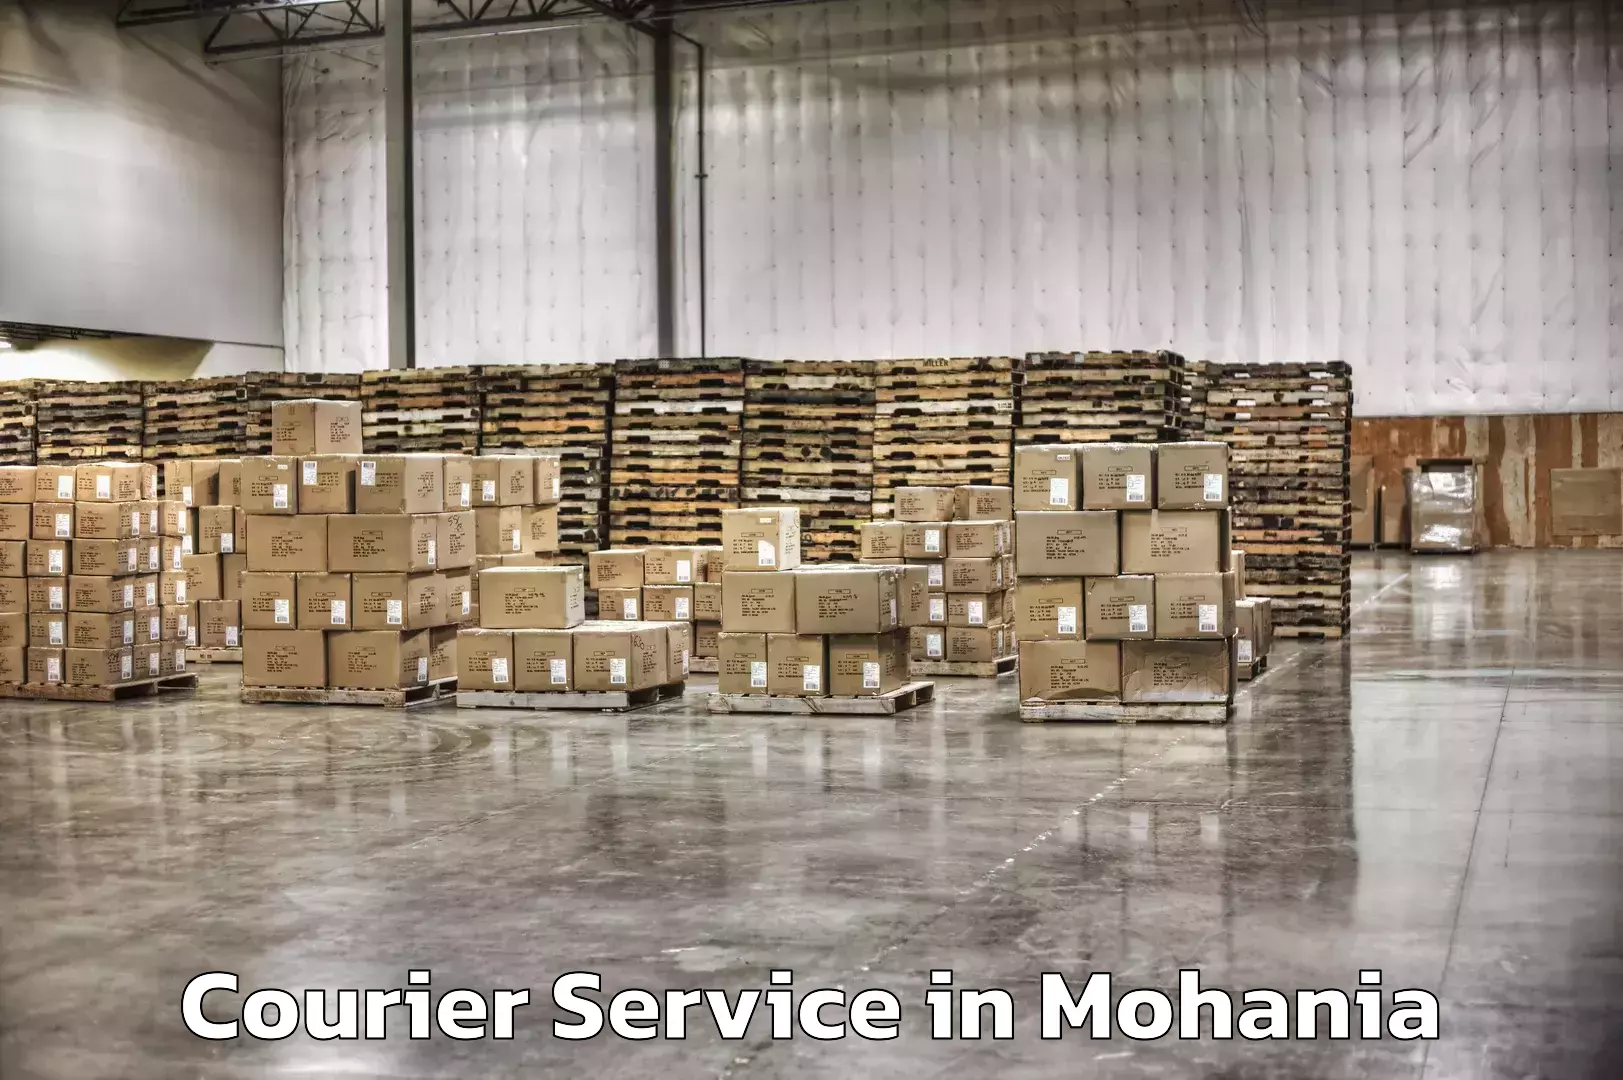 Supply chain efficiency in Mohania